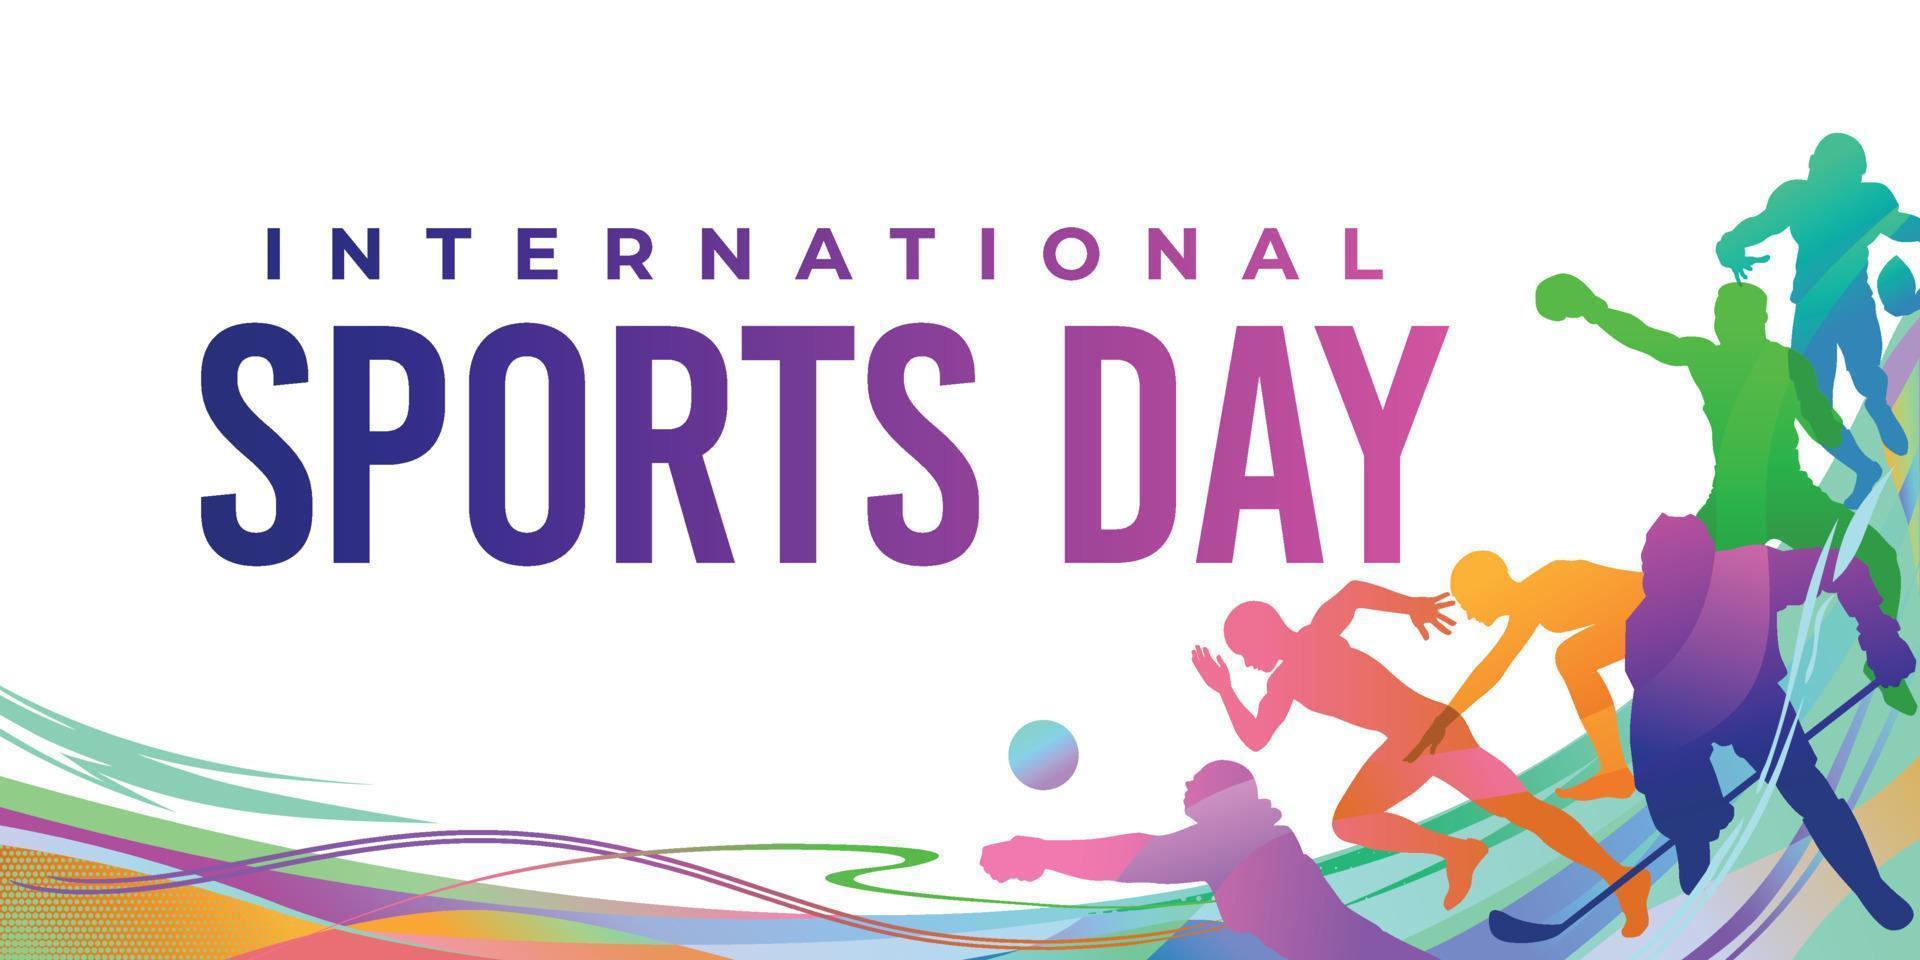 Sports Background Vector. International Sports Day Illustration, Graphic Design for the decoration of gift certificates, banners, and flyer vector